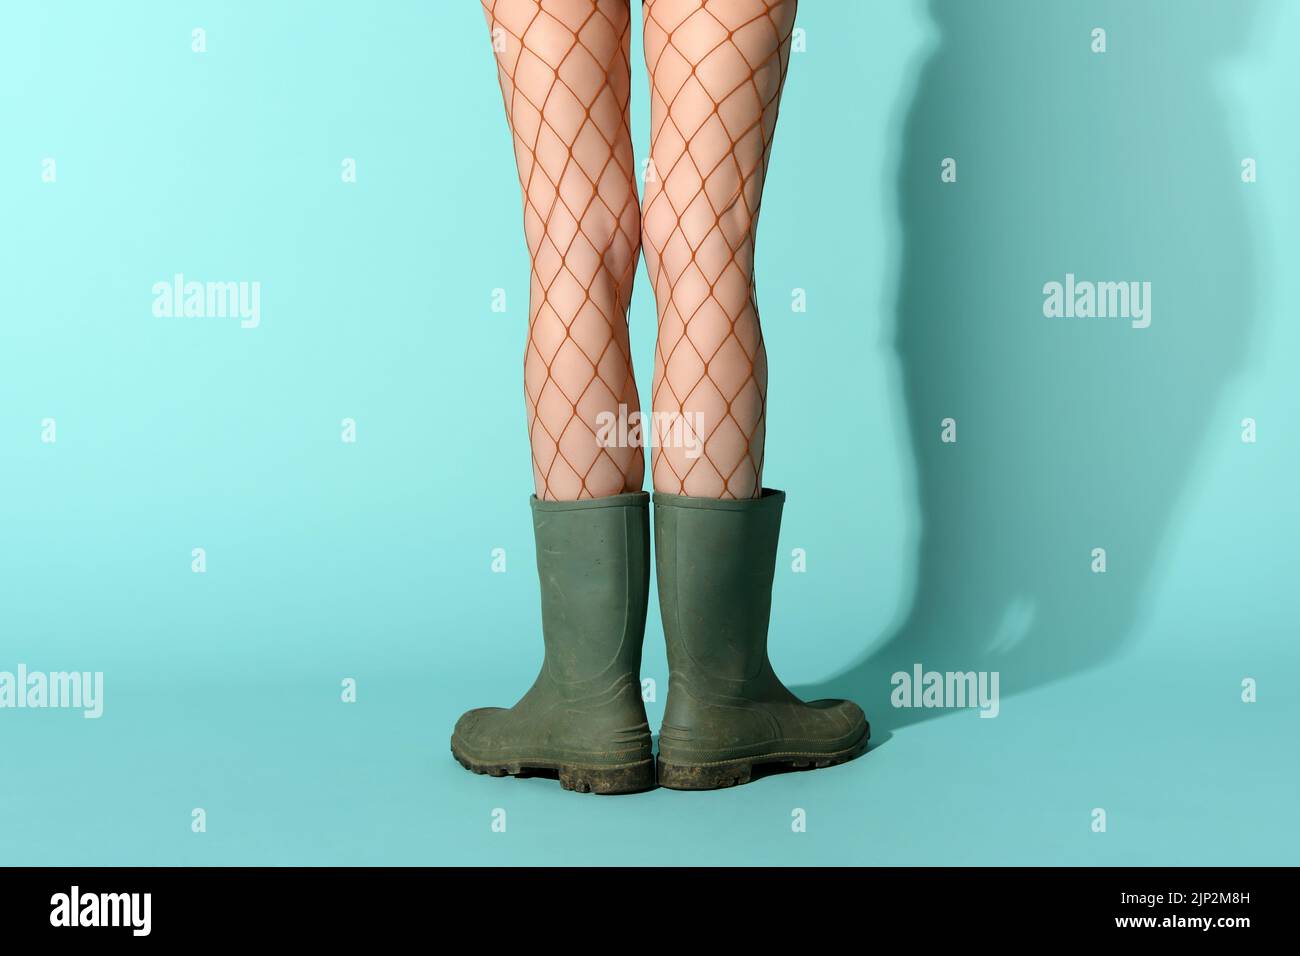 galoshes, net tights, female legs, wellies, wellington boots, welly, woman legs Stock Photo